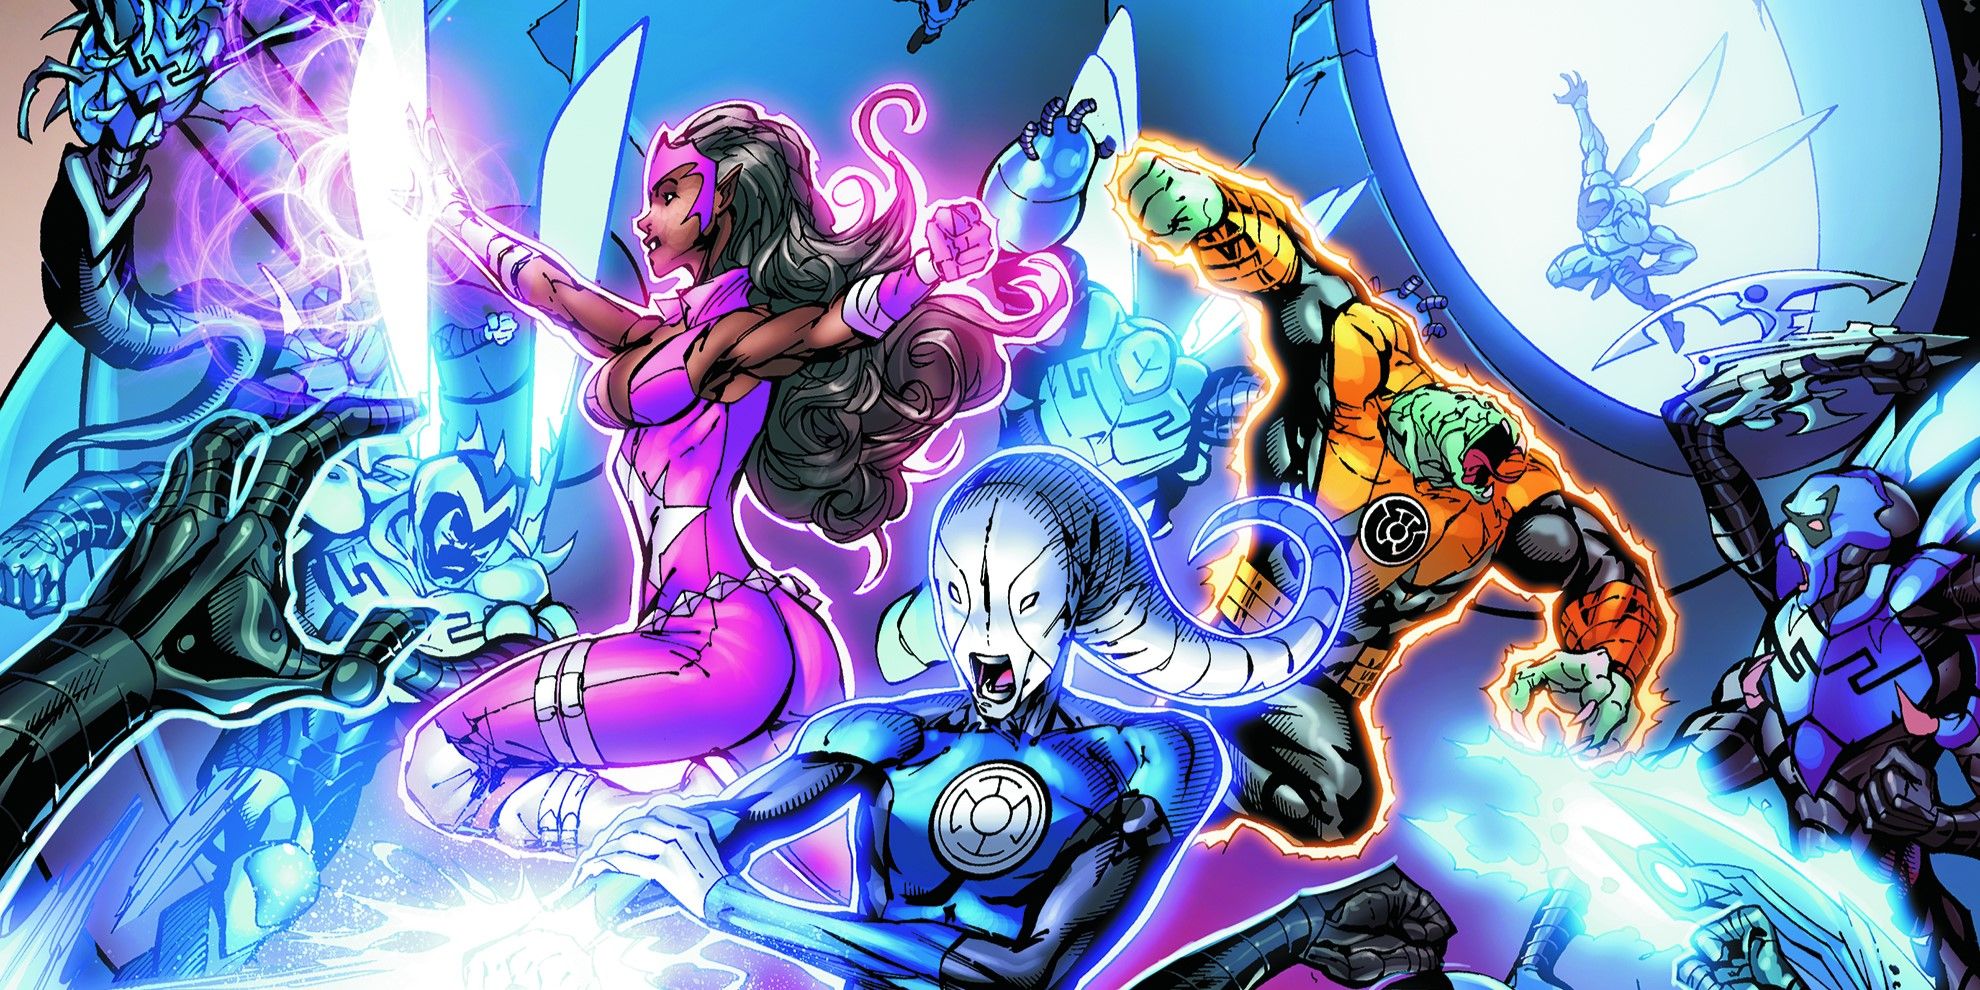 A comic book fight scene between The Reach and the Green Lanterns.Three central characters: a human with long brown hair in pink wields purple fists, a green muscled creature in orange costume is about to deliver a flying punch to an armored alien, and a blue long-horned alien shoots from their fist.